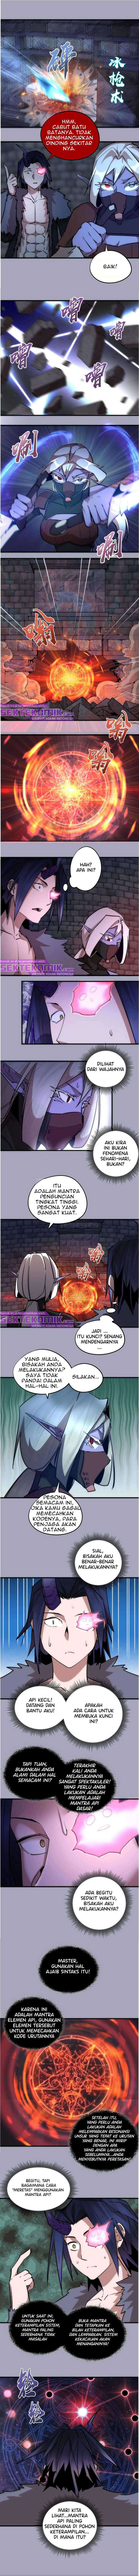 I’m Not The Overlord Chapter 49